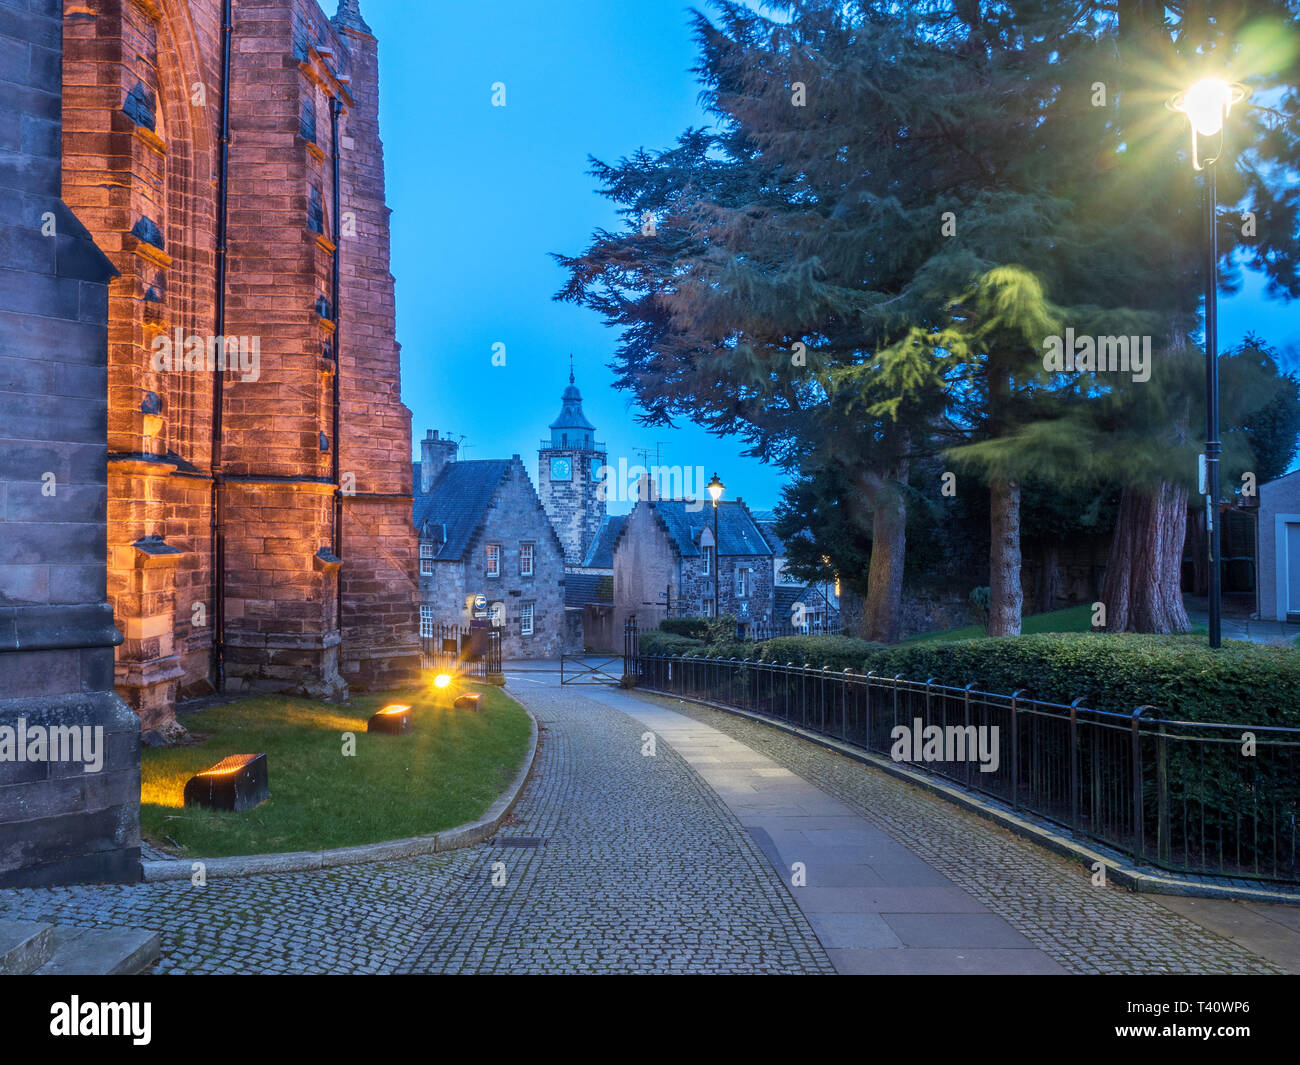 Stirling Tolbooth from the Church of the Holy Rude at dusk City of Stirling Scotland Stock Photo